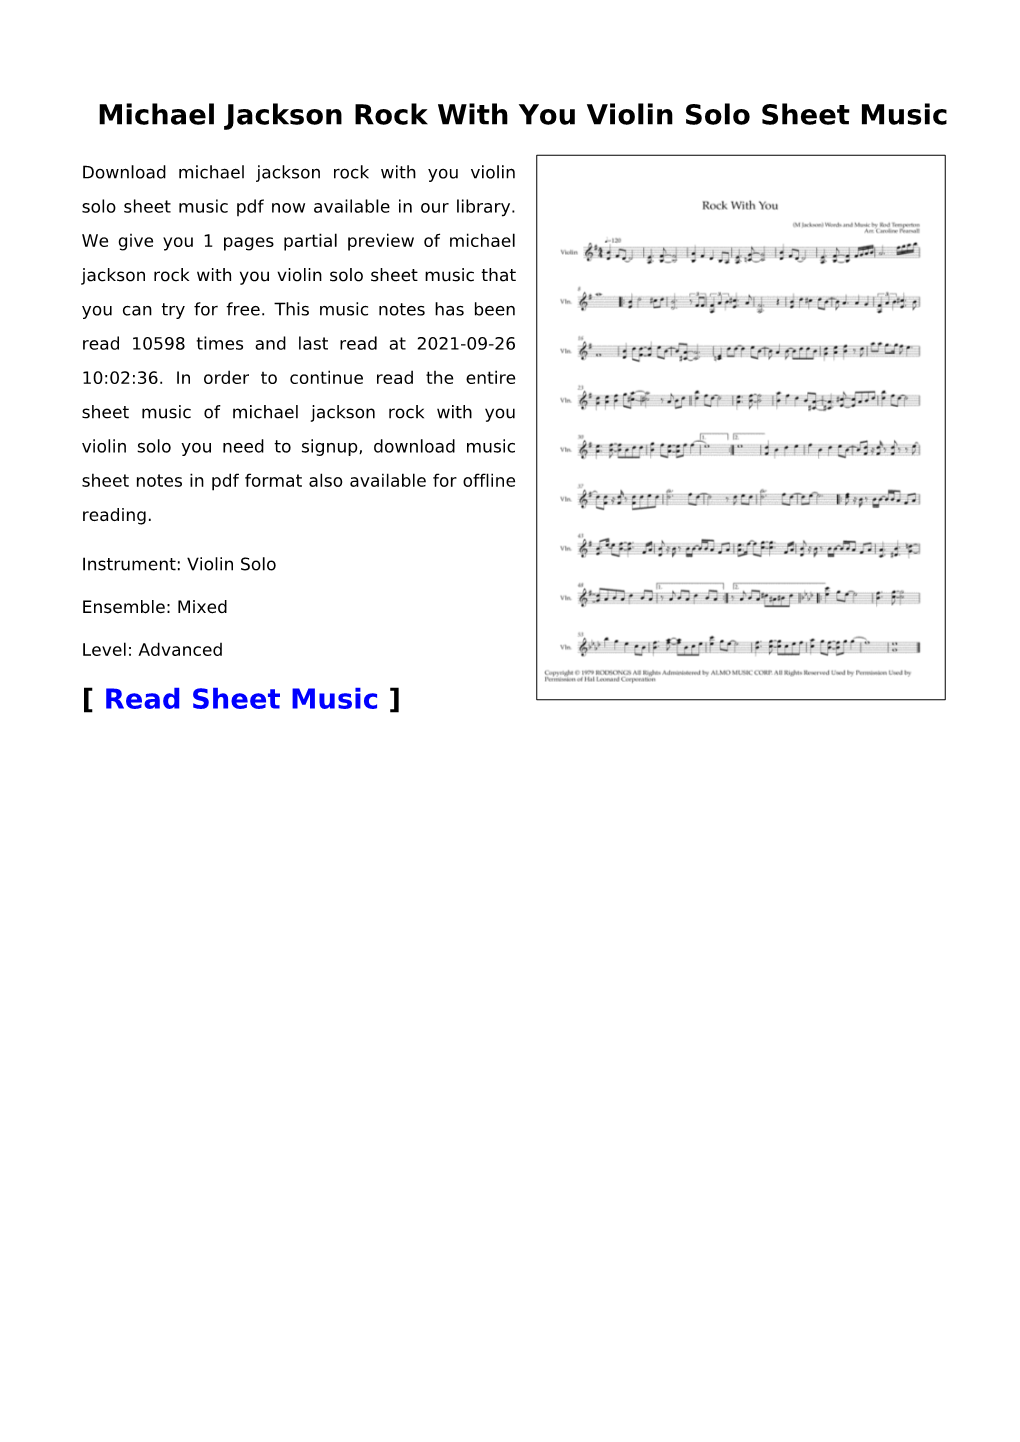 Michael Jackson Rock with You Violin Solo Sheet Music